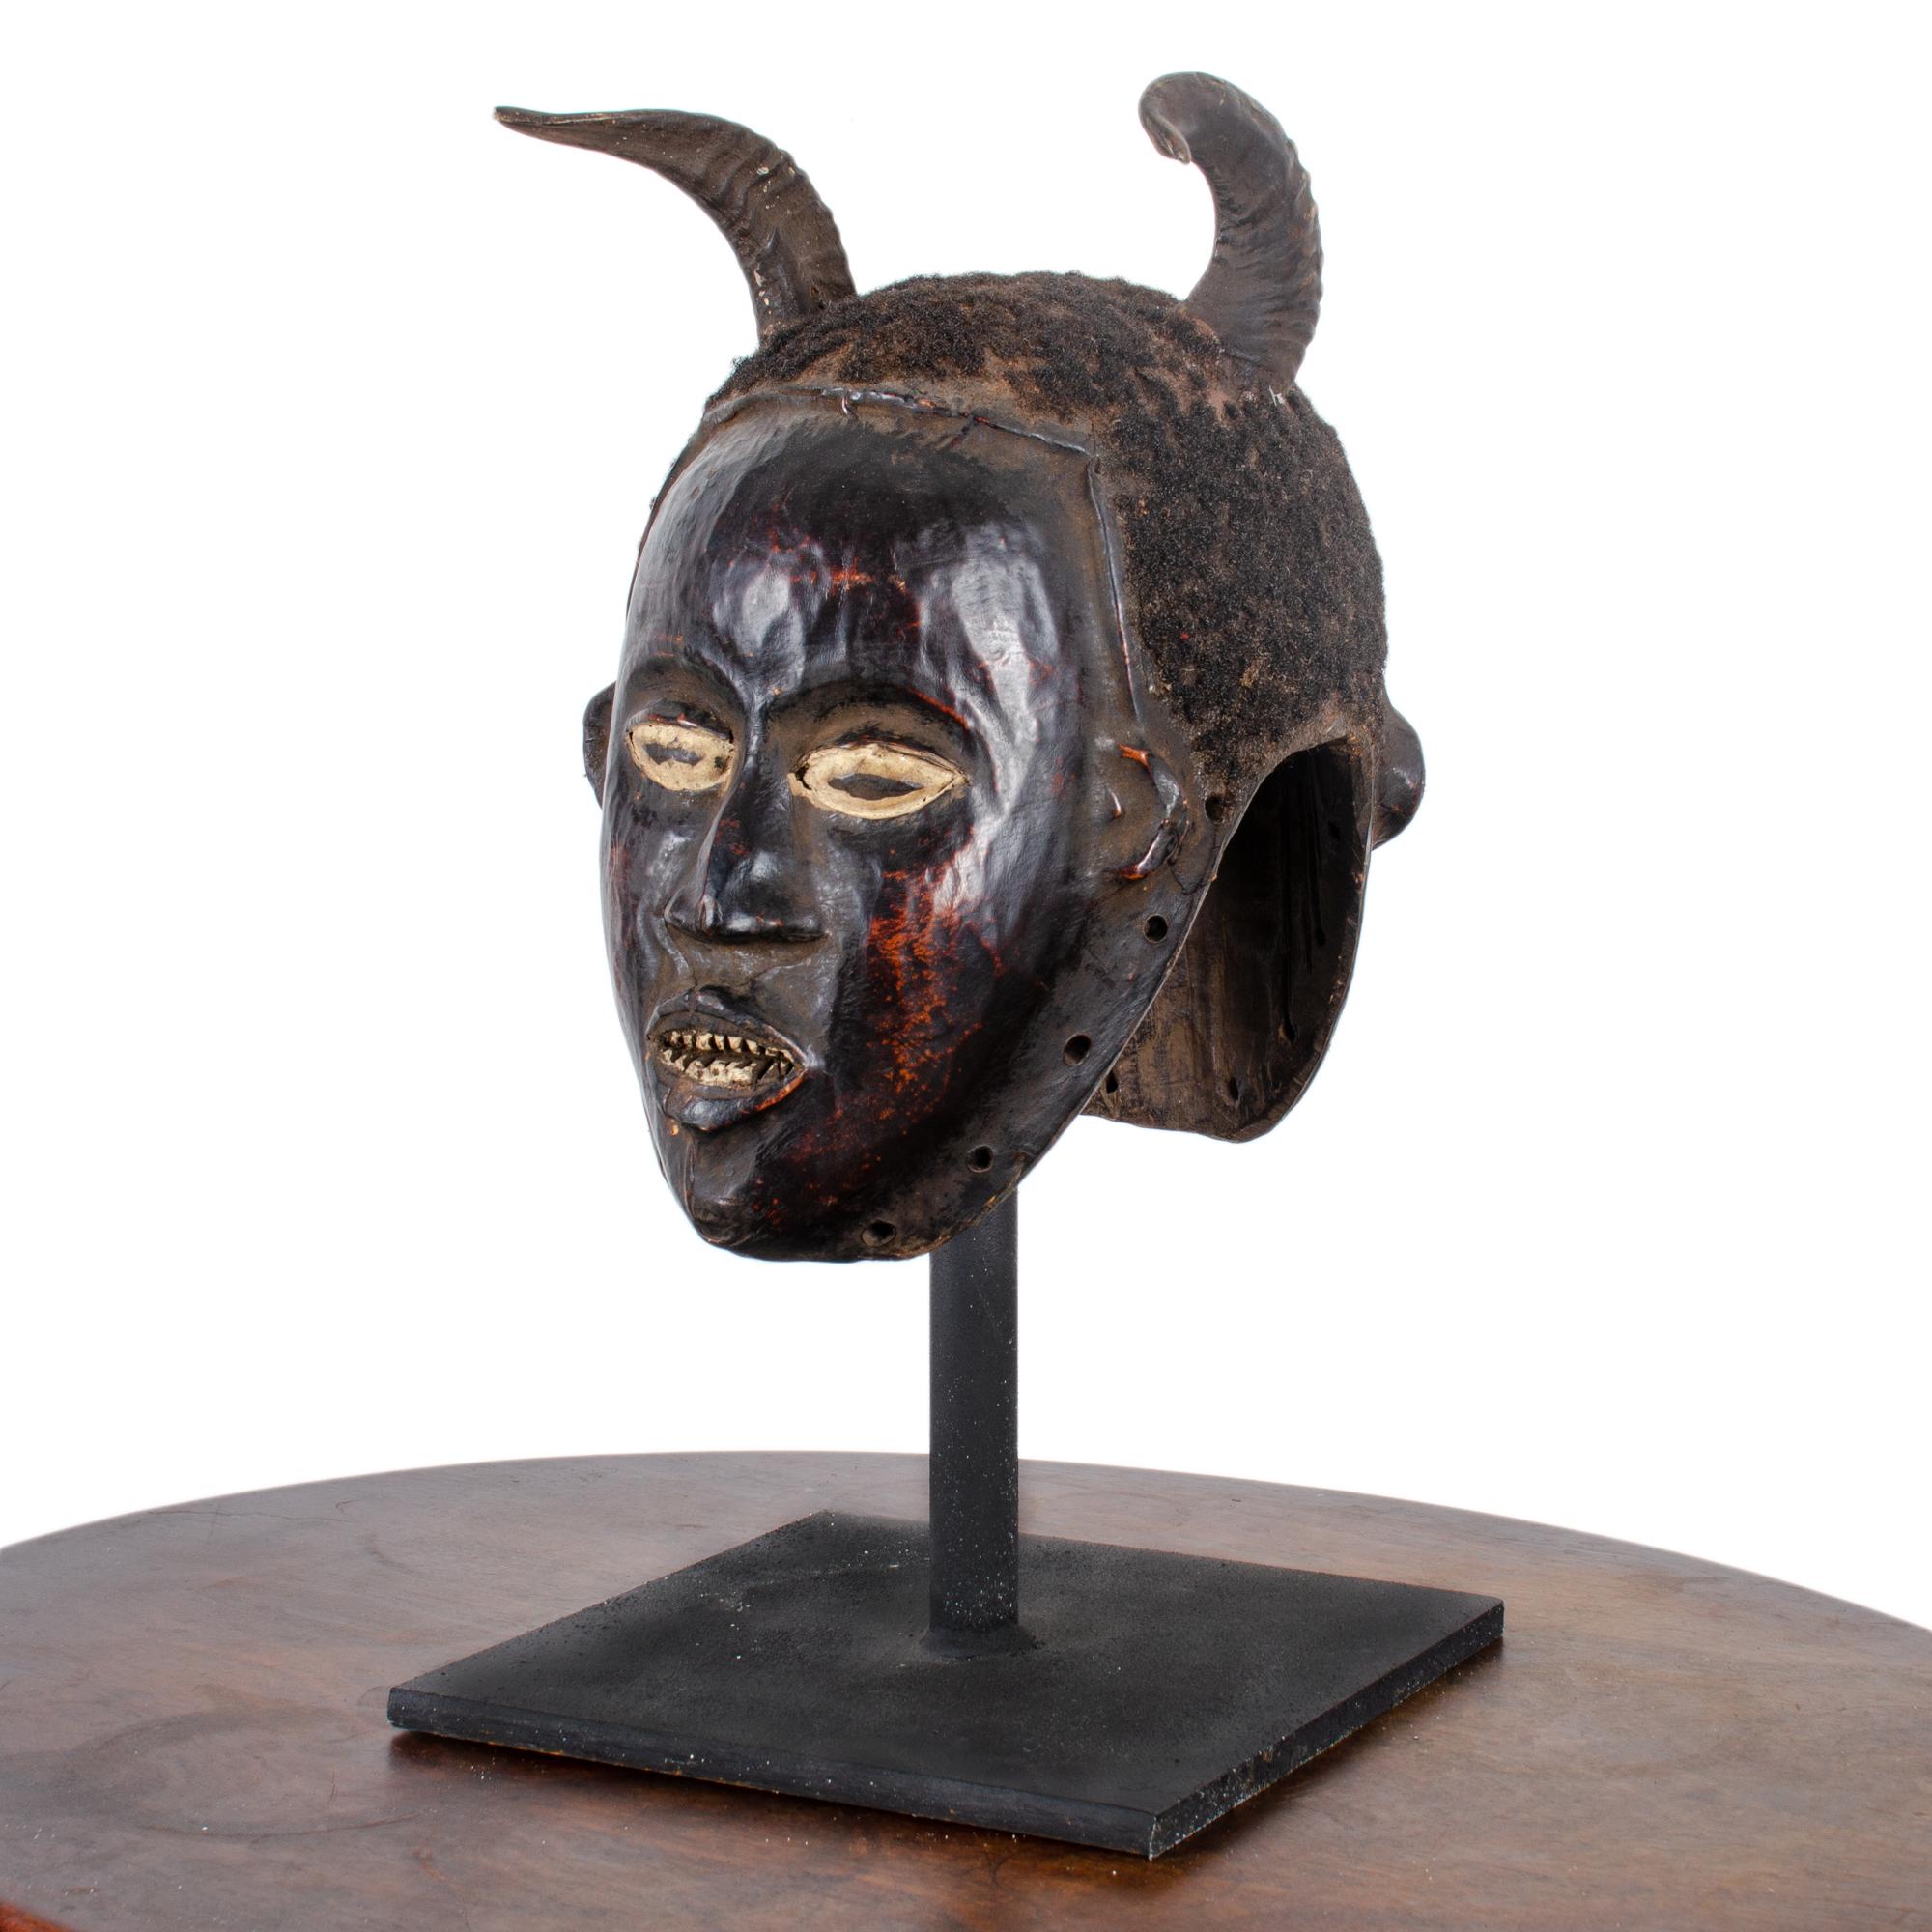 Janiform ceremonial headdress from the Ekoi, Ejagham people of the Cross River region of Southeastern Nigeria, circa early 20th century.  

The janus symbolism from the Cross River region suggests that the wearer can merge male and female attributes